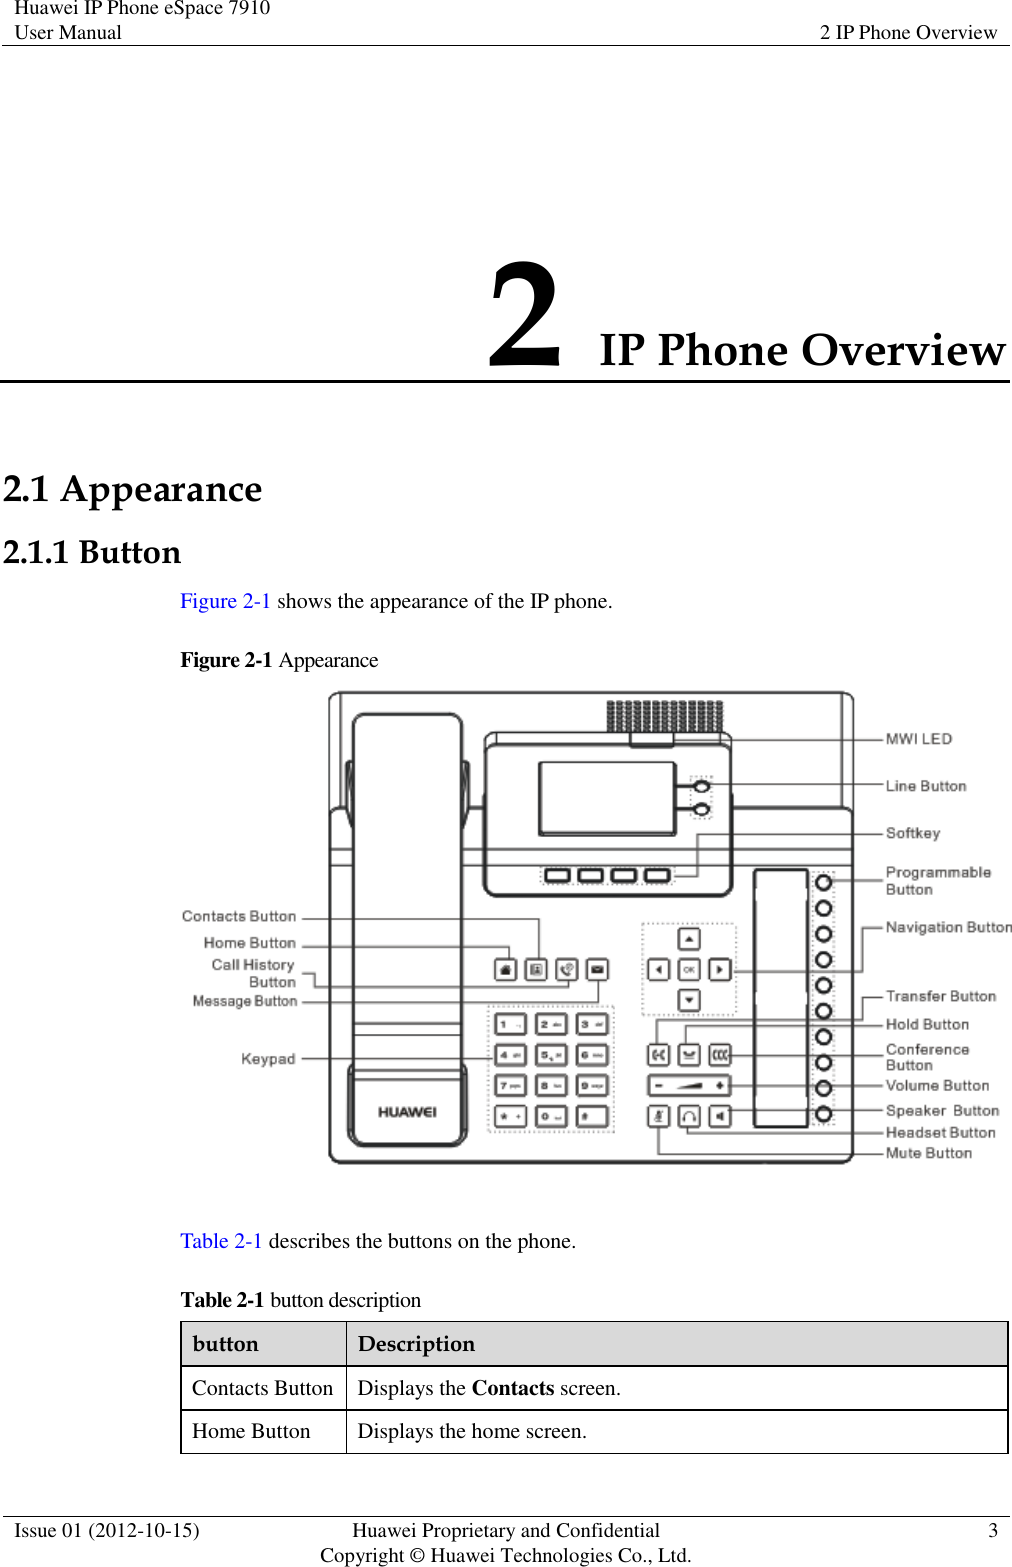 Huawei IP Phone eSpace 7910 User Manual 2 IP Phone Overview  Issue 01 (2012-10-15) Huawei Proprietary and Confidential                                     Copyright © Huawei Technologies Co., Ltd. 3  2 IP Phone Overview 2.1 Appearance 2.1.1 Button Figure 2-1 shows the appearance of the IP phone. Figure 2-1 Appearance   Table 2-1 describes the buttons on the phone. Table 2-1 button description button Description Contacts Button Displays the Contacts screen. Home Button Displays the home screen. 